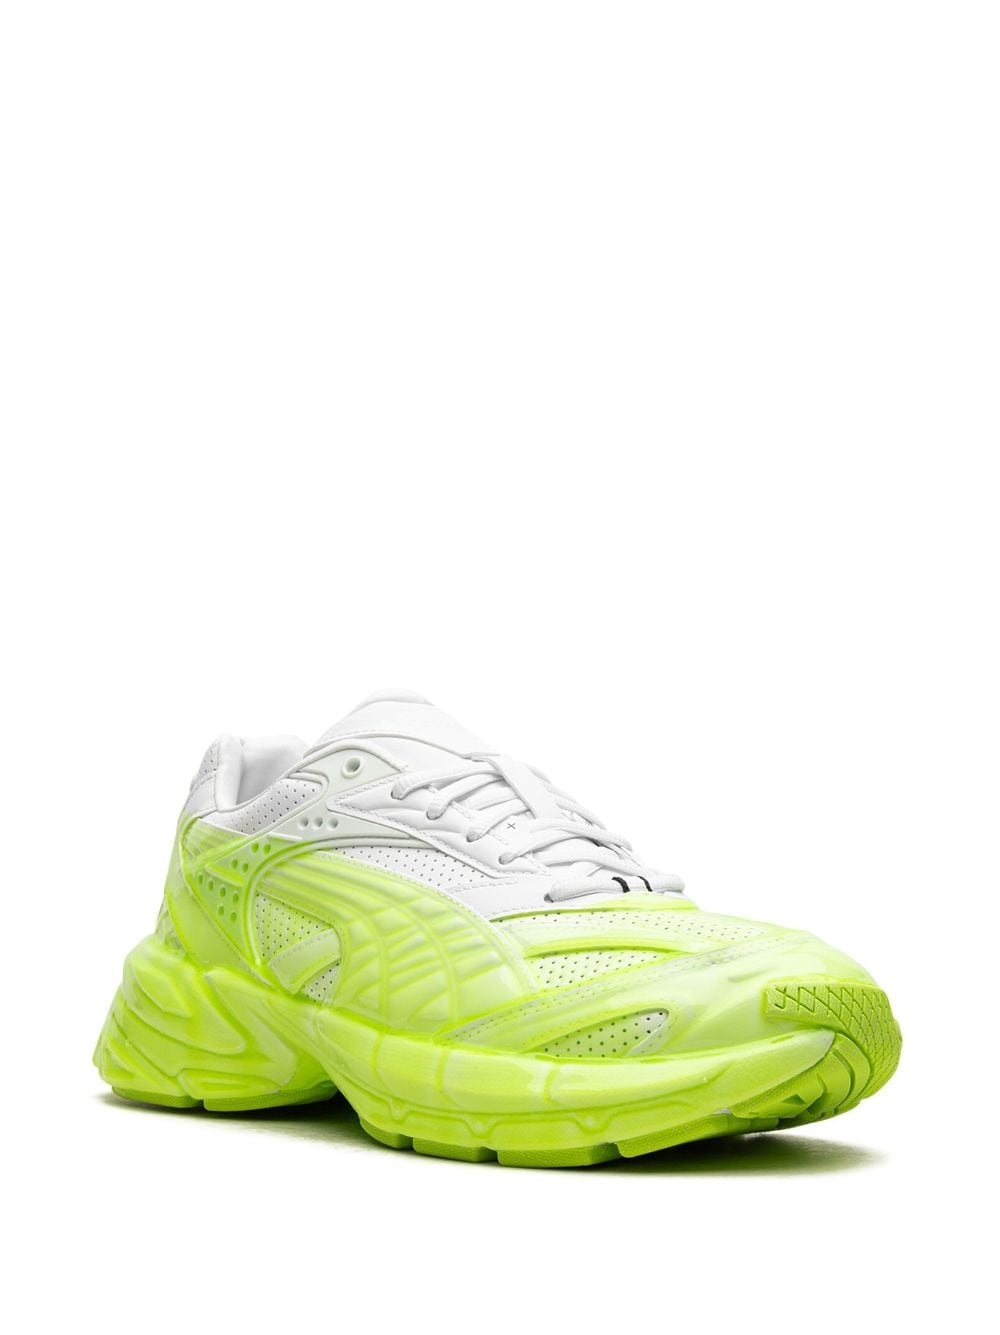 Velophasis Slime "Puma White/Pro Green" sneakers - 2